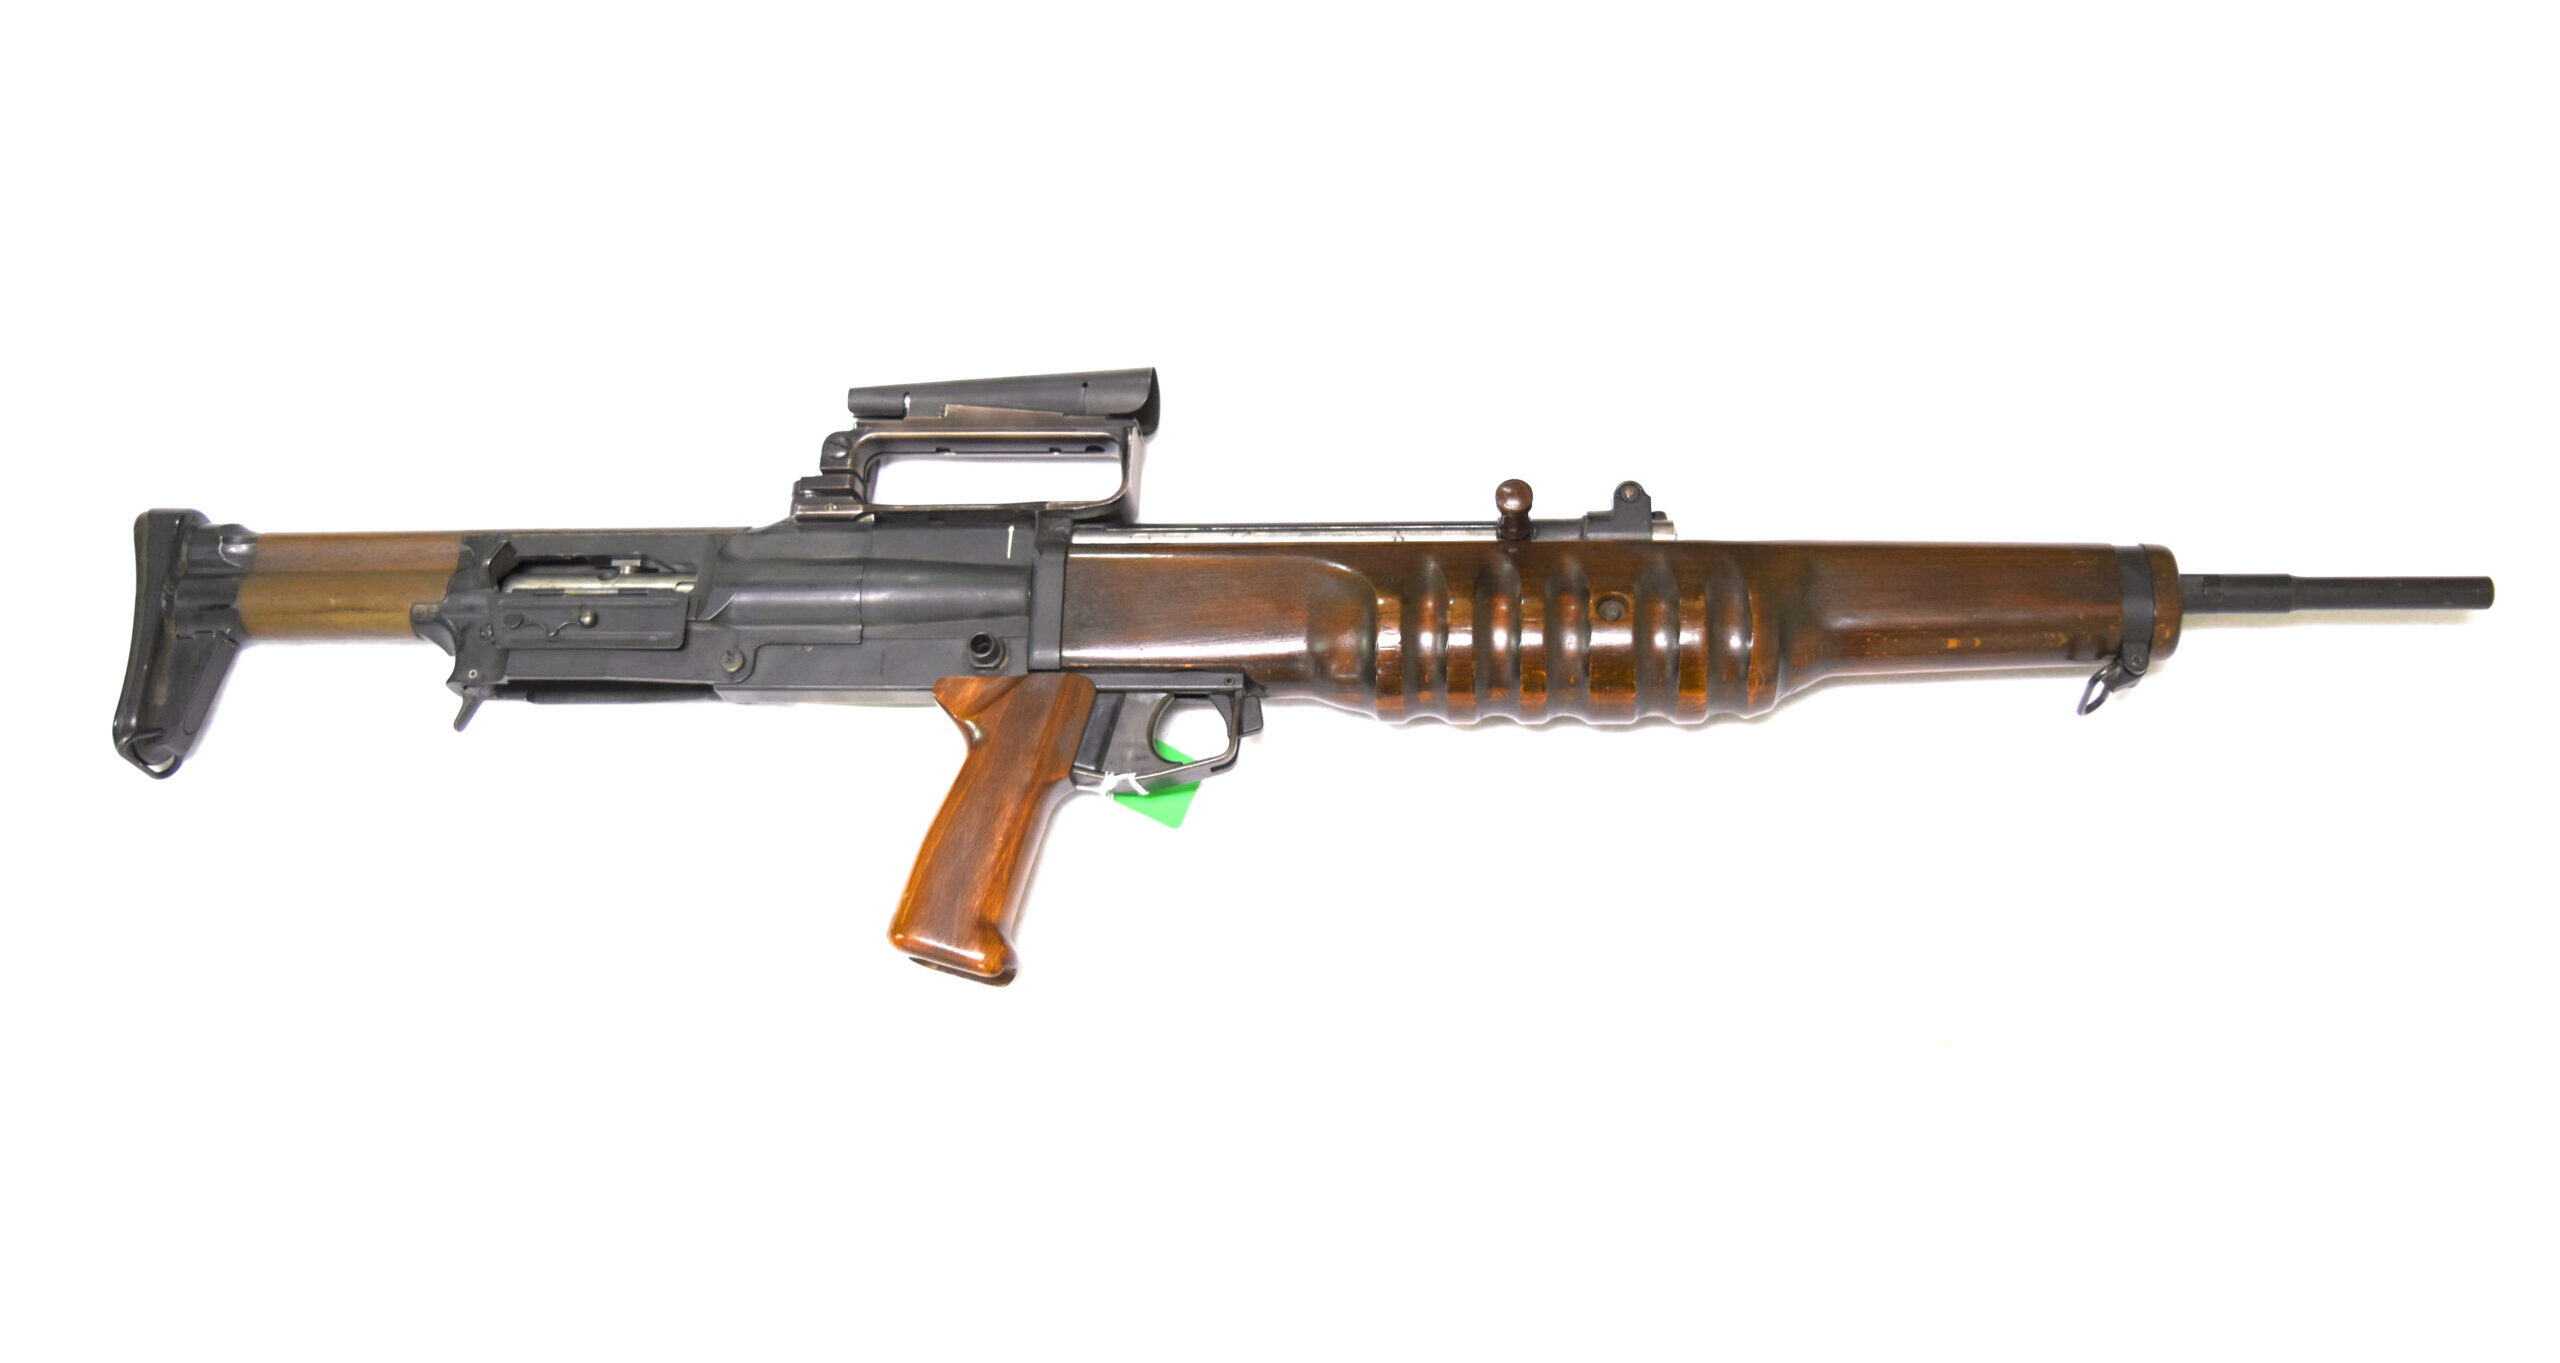 The EM-2 was one of the first bullpup designs in the history of firearms.